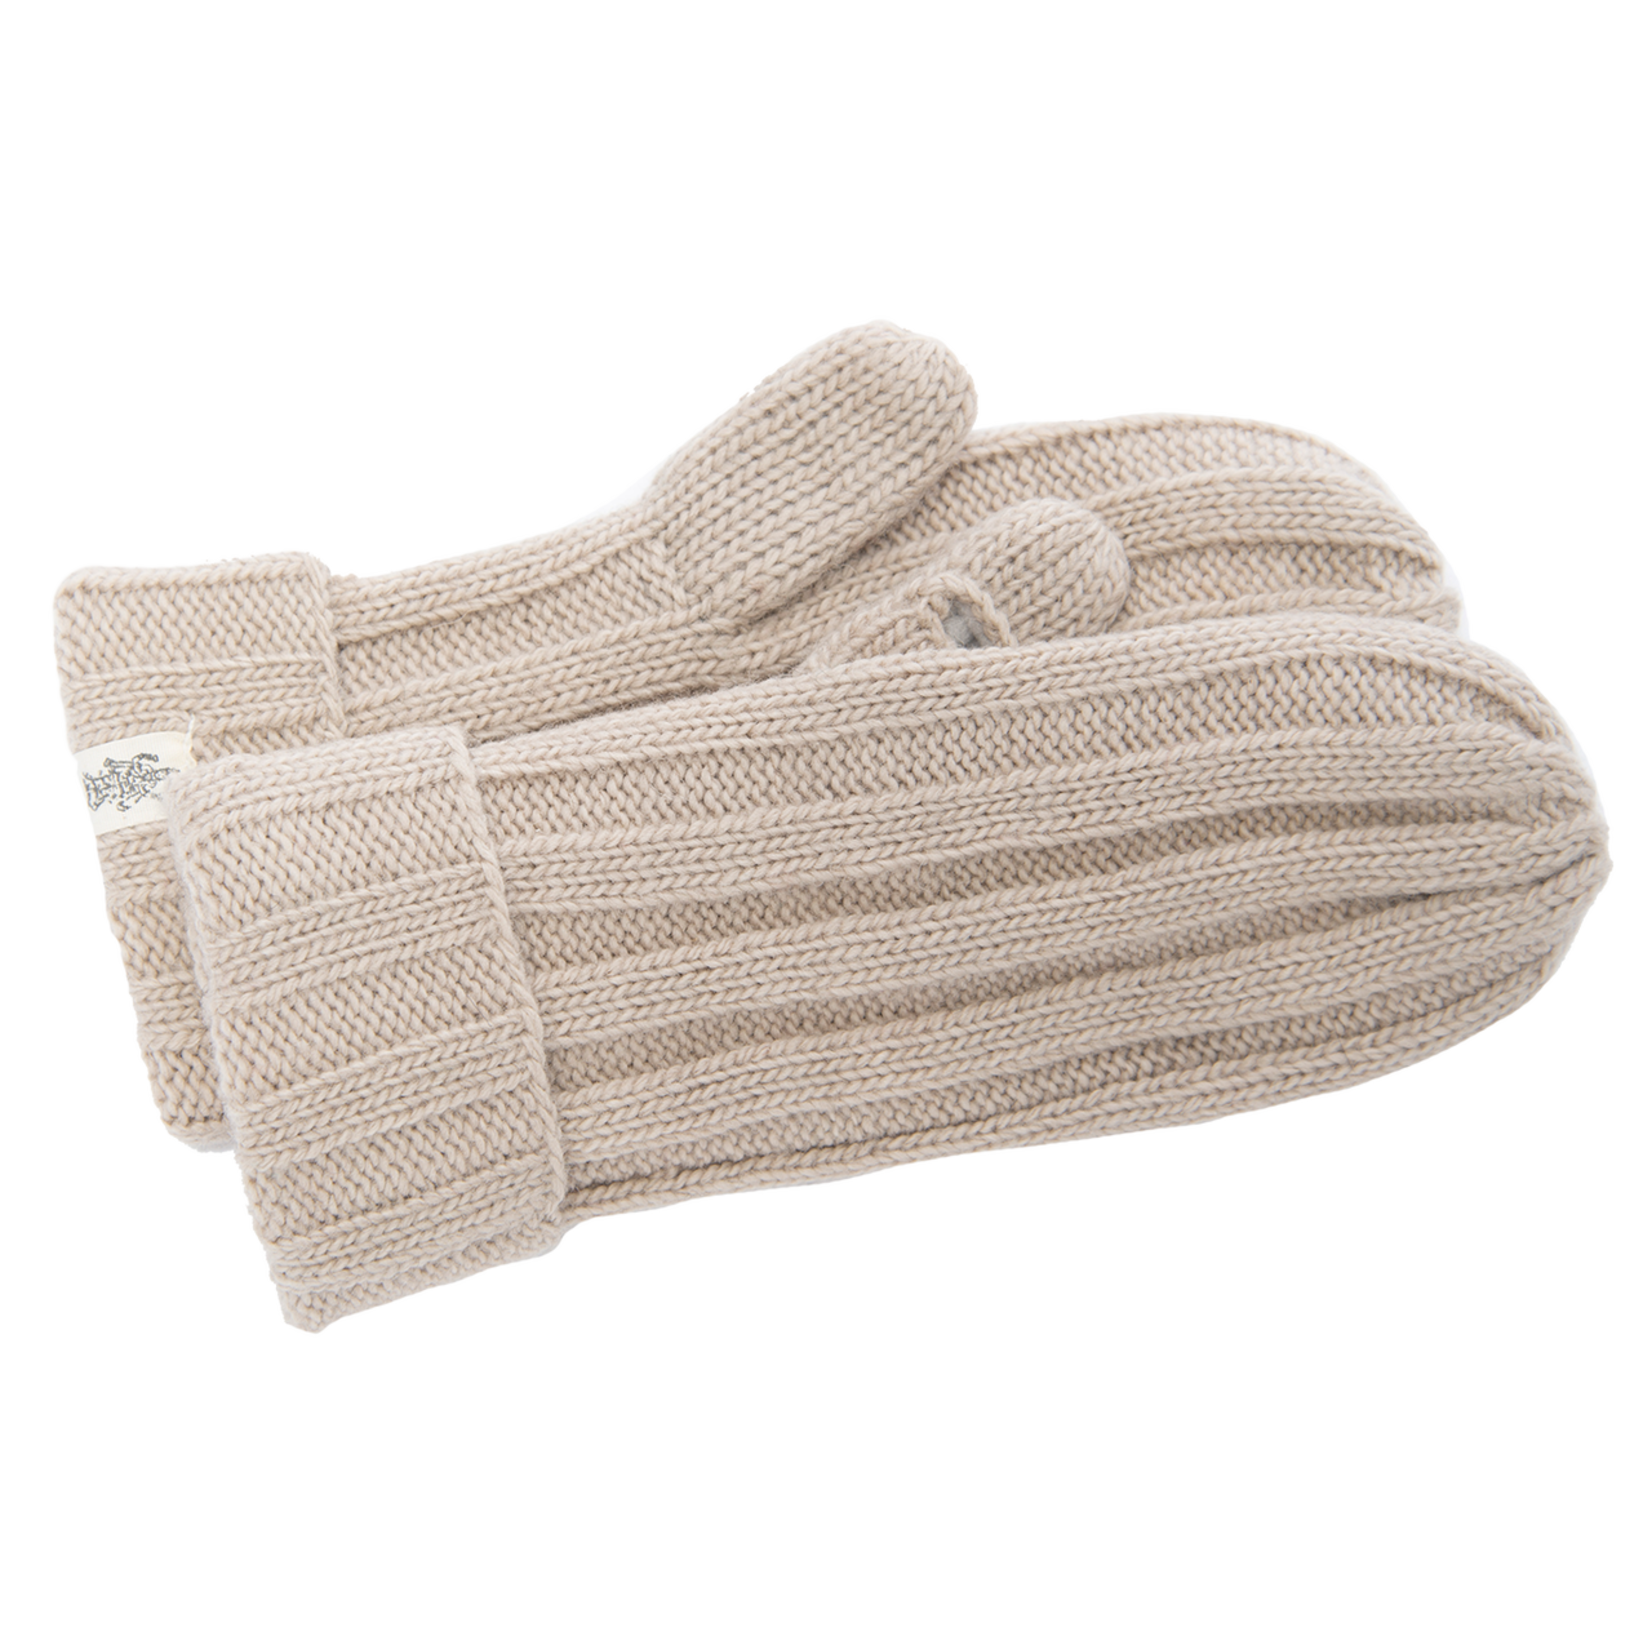 Nirvanna Designs Inc. Ribbed Mittens in Oatmeal